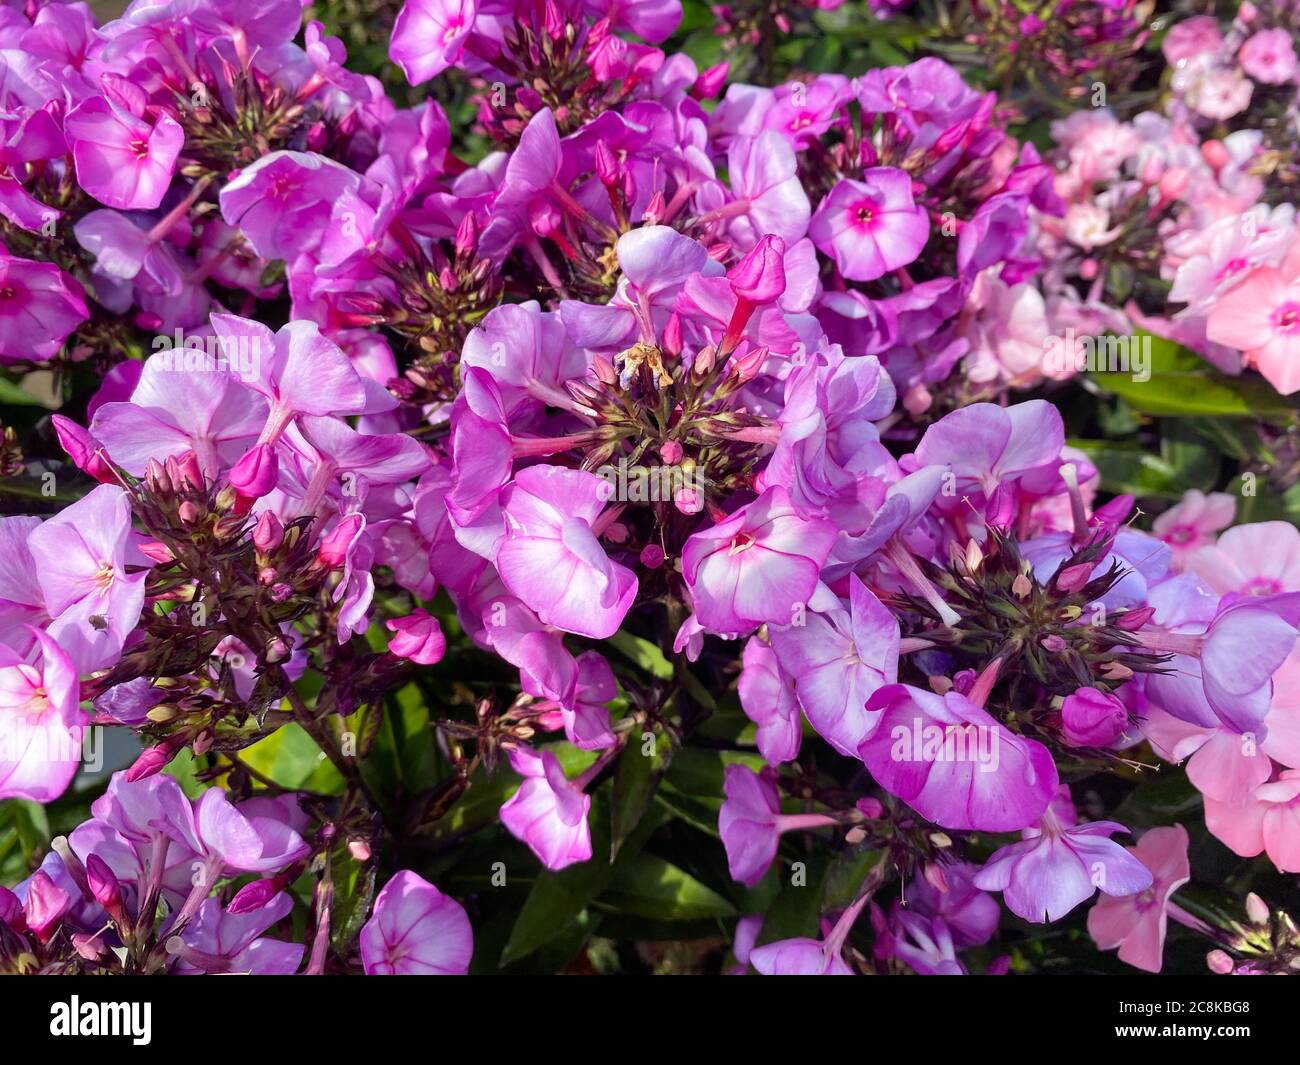 Top view closeup of isolated beautiful white pink and purple flowers (phlox paniculata) with green leaves Stock Photo